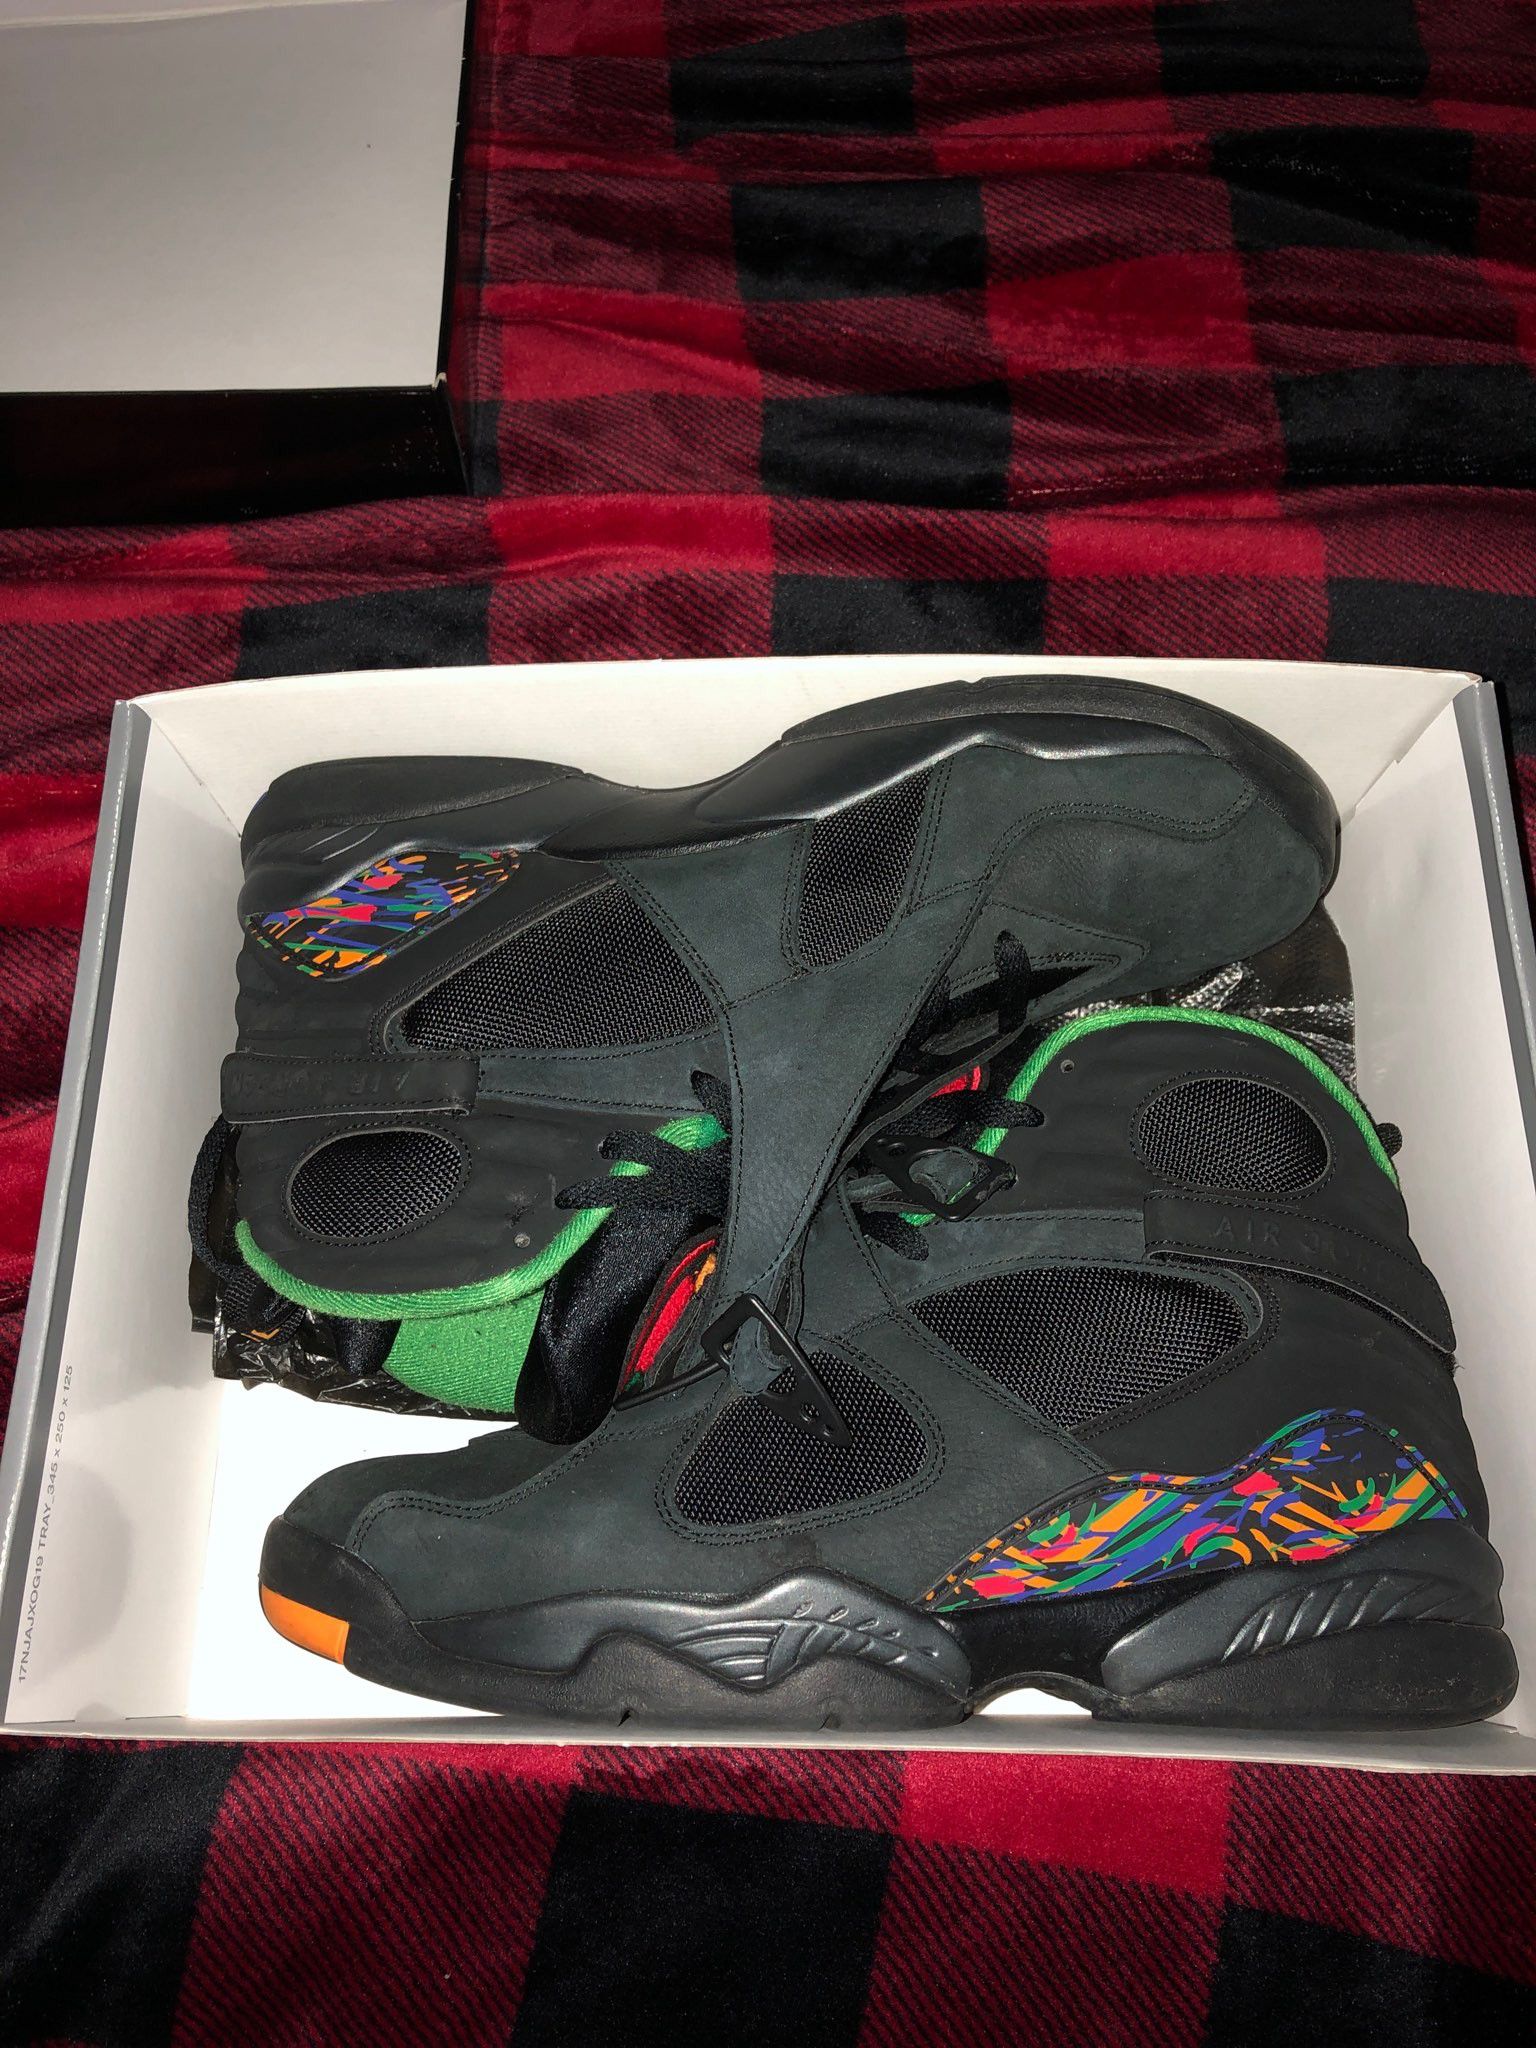 Jordan 8s great condition size 11 and 1/2